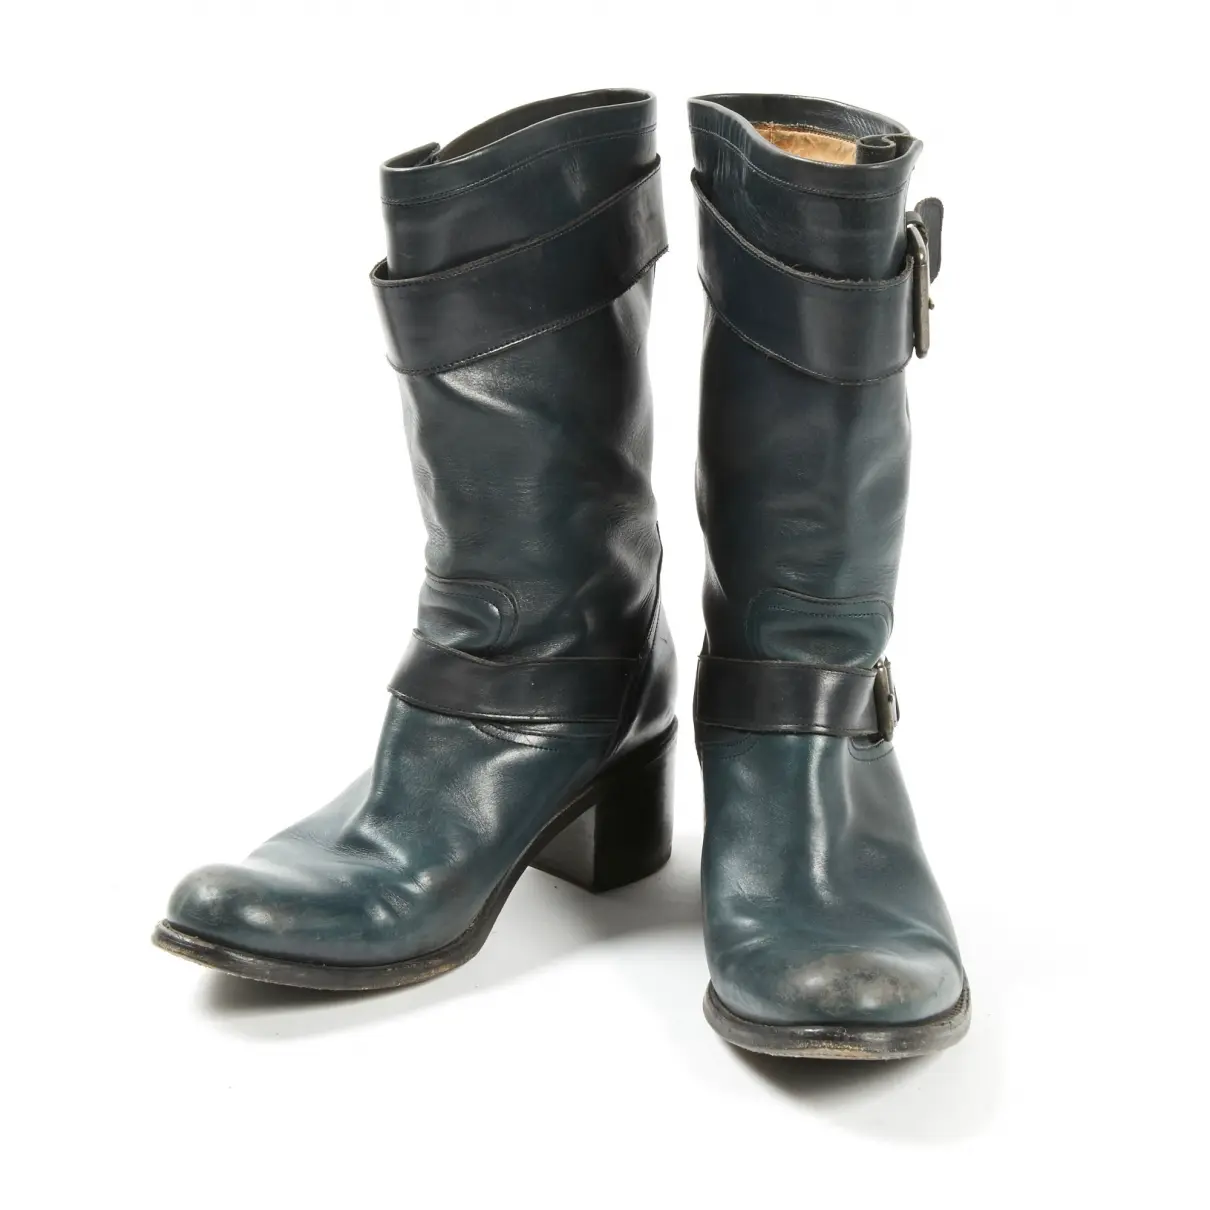 Free Lance Leather biker boots for sale